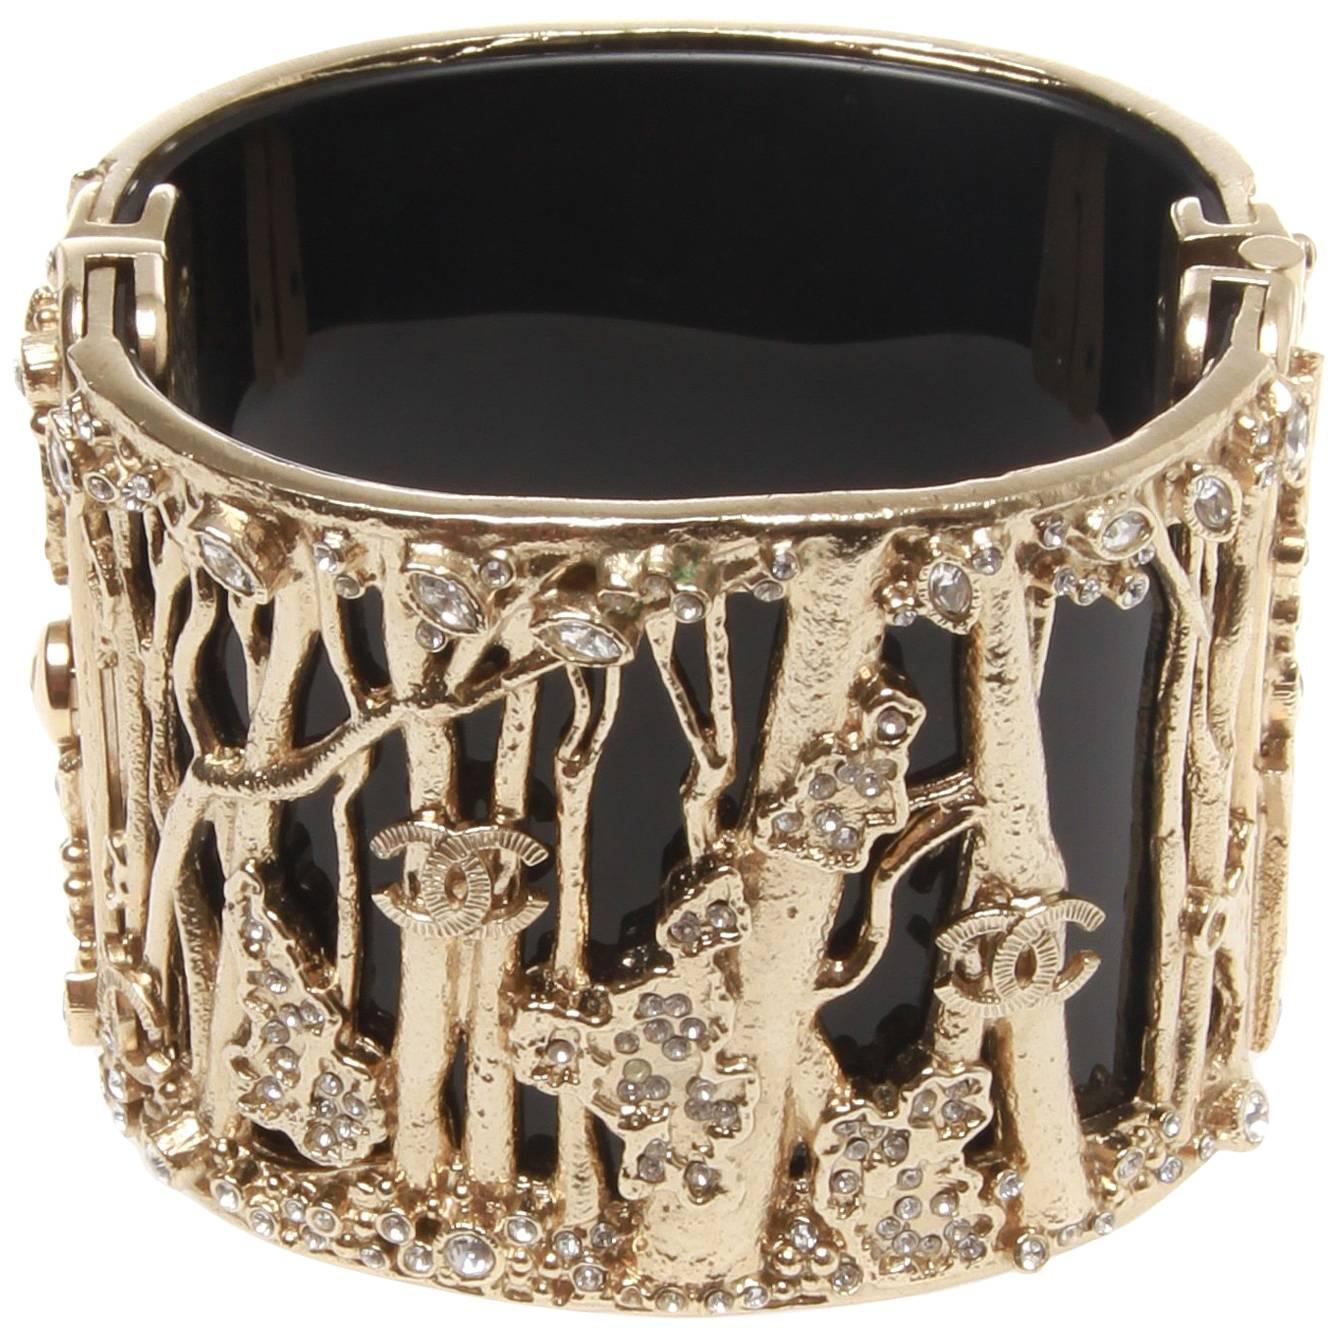 Chanel Black Resin Encrusted Forest Cuff, Autumn 2011 